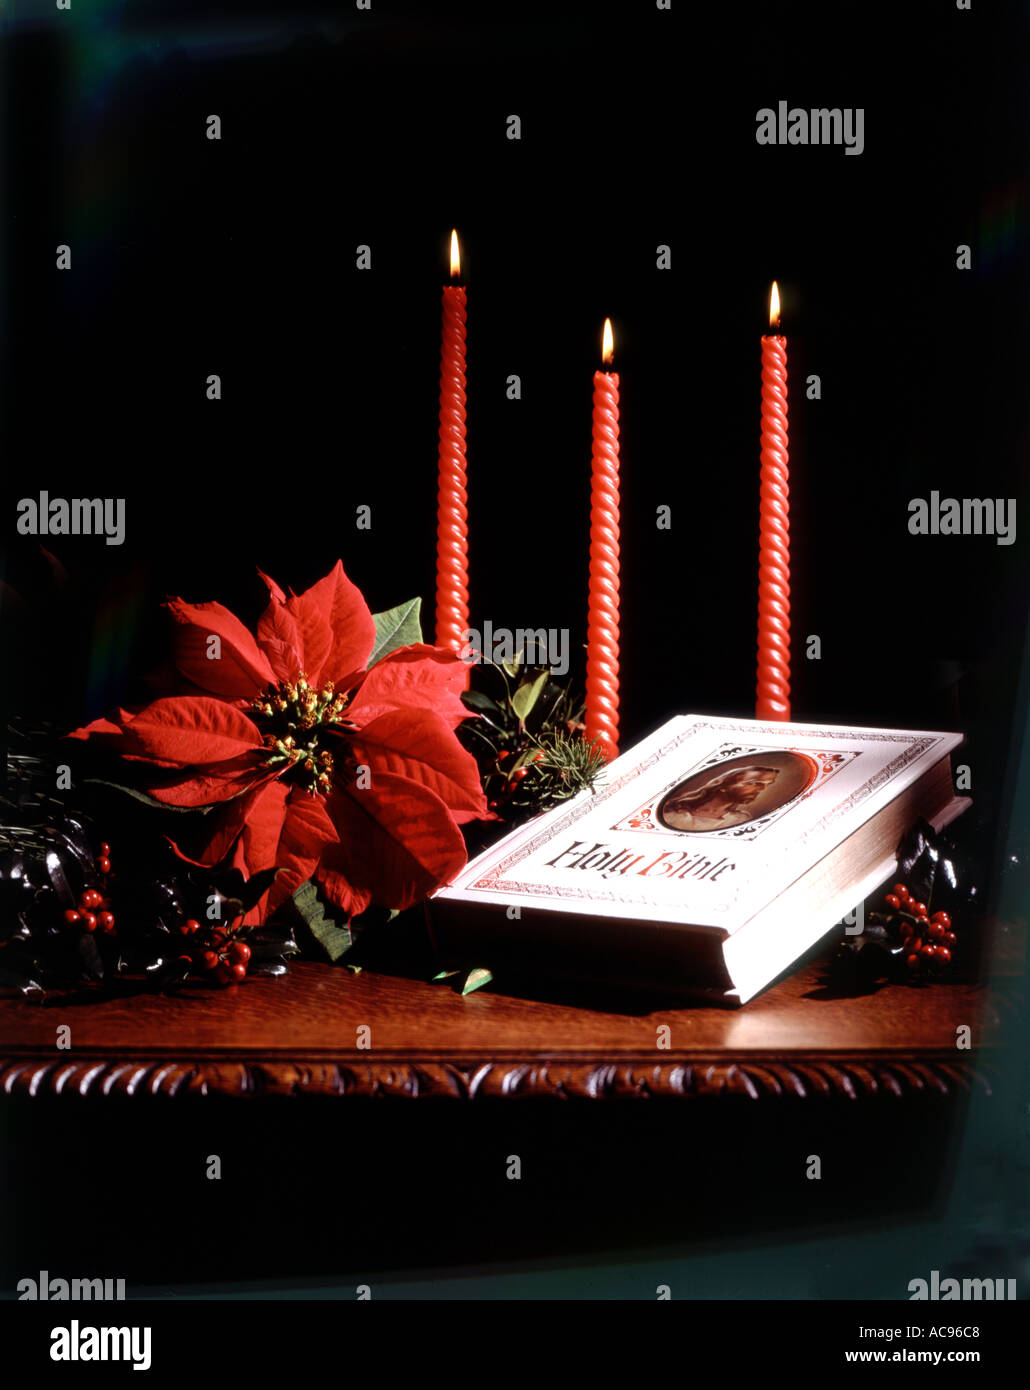 RELIGIOUS CHRISTMAS STILL LIFE WITH BIBLE CANDLES AND POINSETTIA PLANT ON  ANTIQUE CARVED WOOD TABLE Stock Photo - Alamy